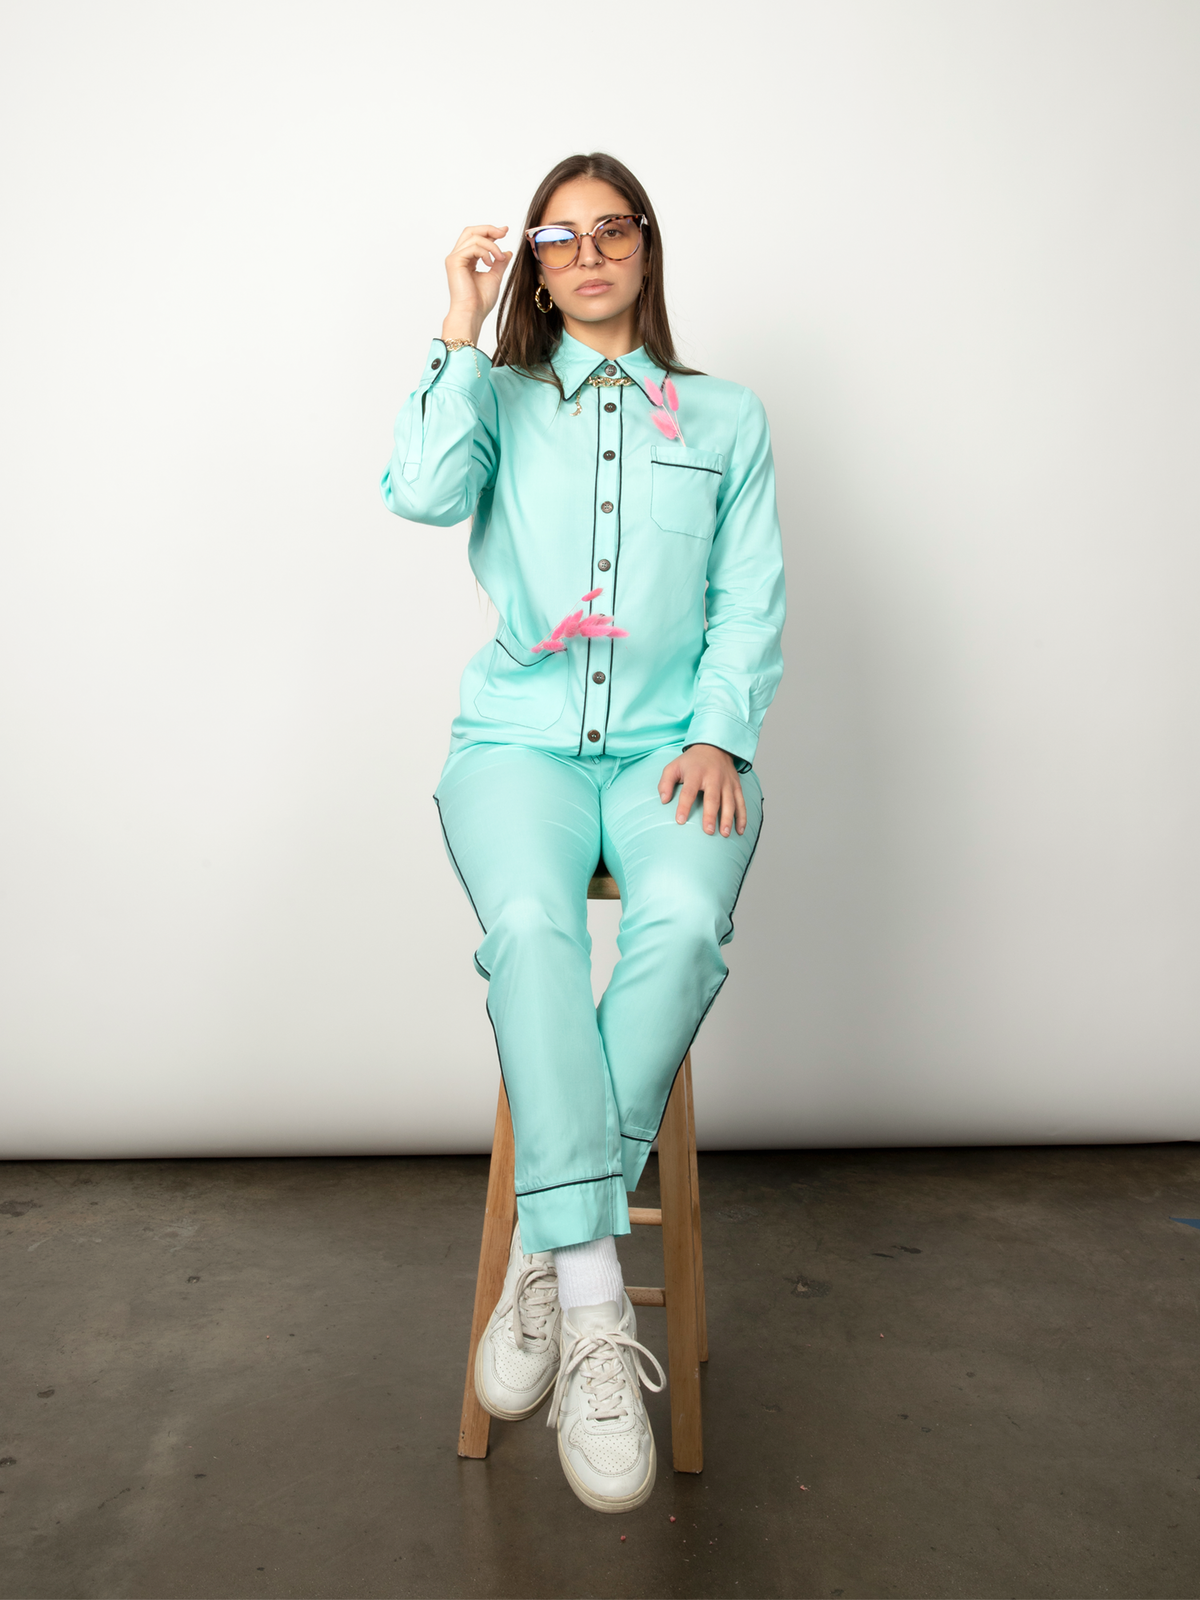 Woman poses wearing a teal long-sleeve pajama set and glasses.